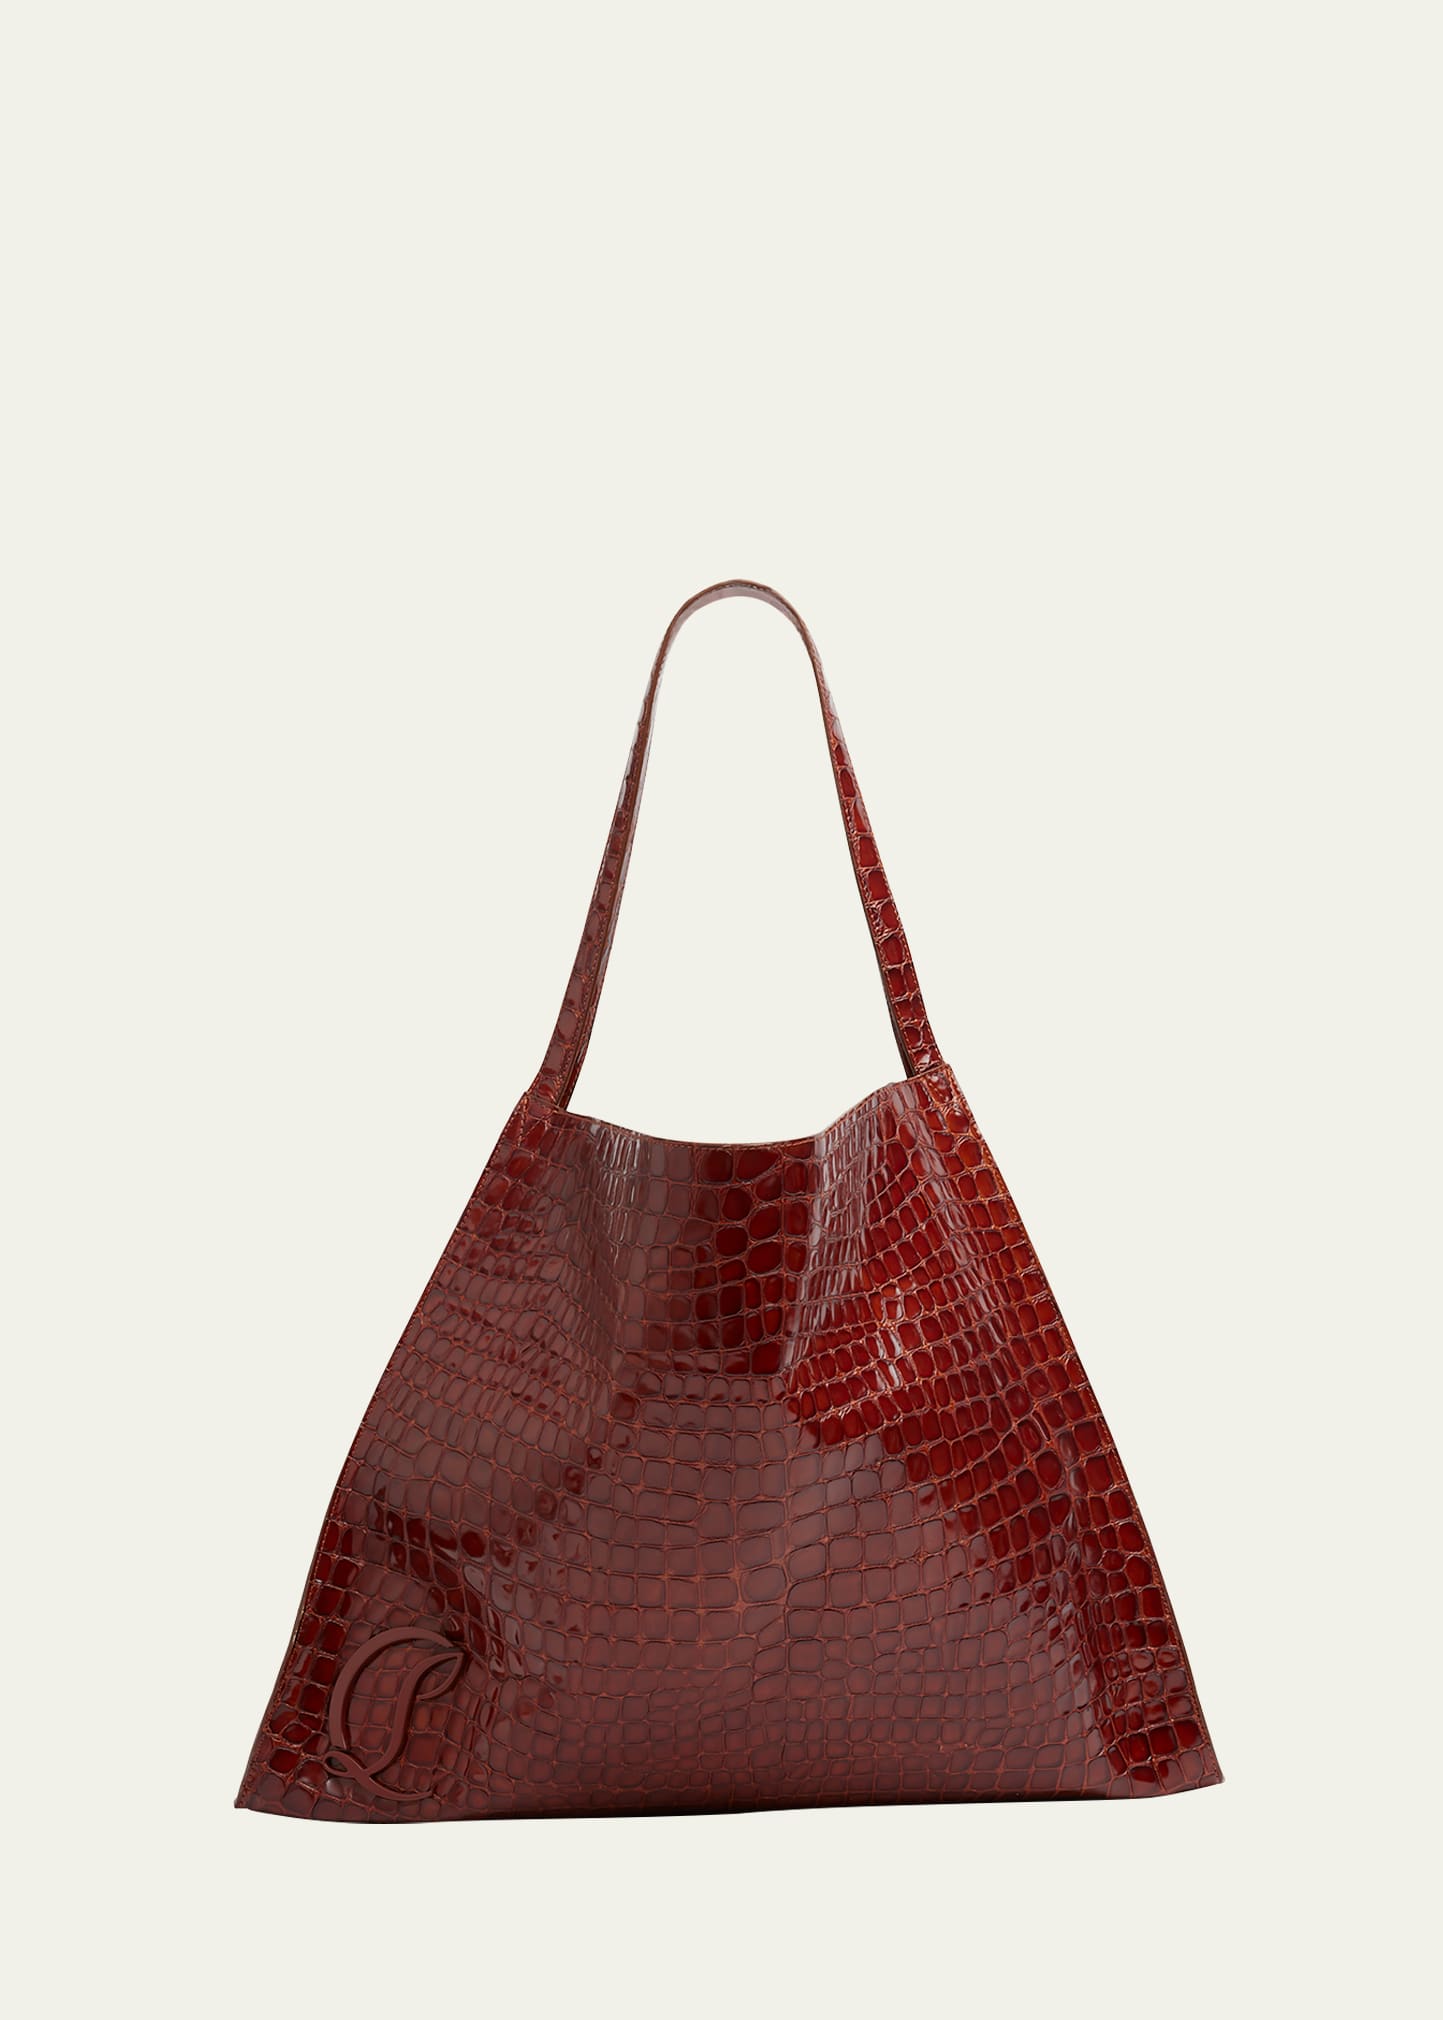 Christian Louboutin Le 54 Tote In Alligator Embossed Leather In Brown